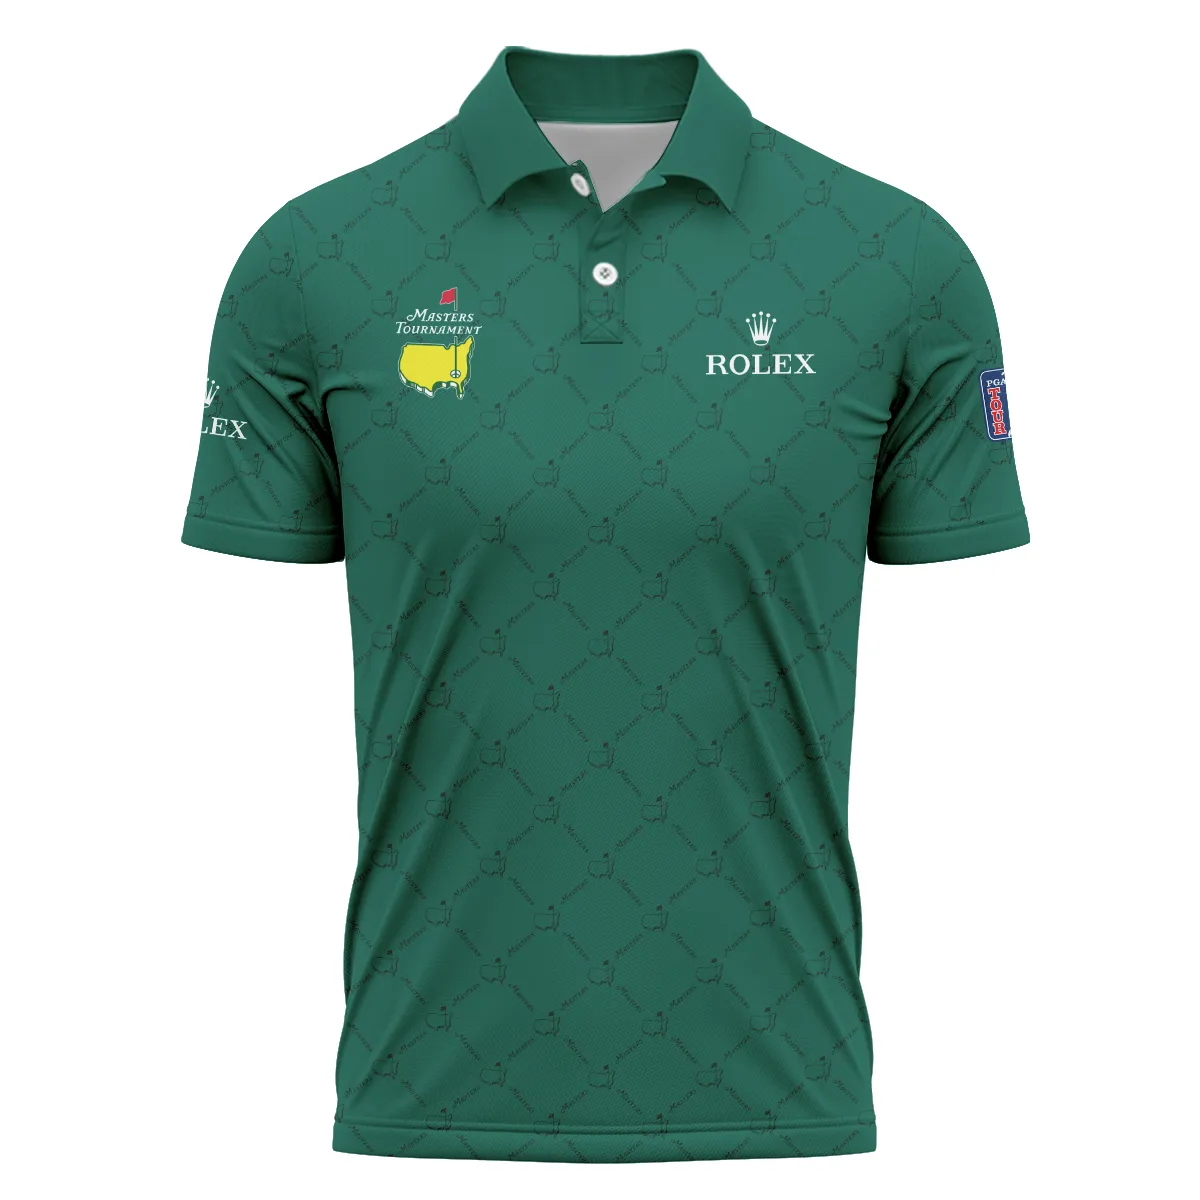 Golf Sport Pattern Color Green Mix Black Masters Tournament Rolex Vneck Polo Shirt Style Classic